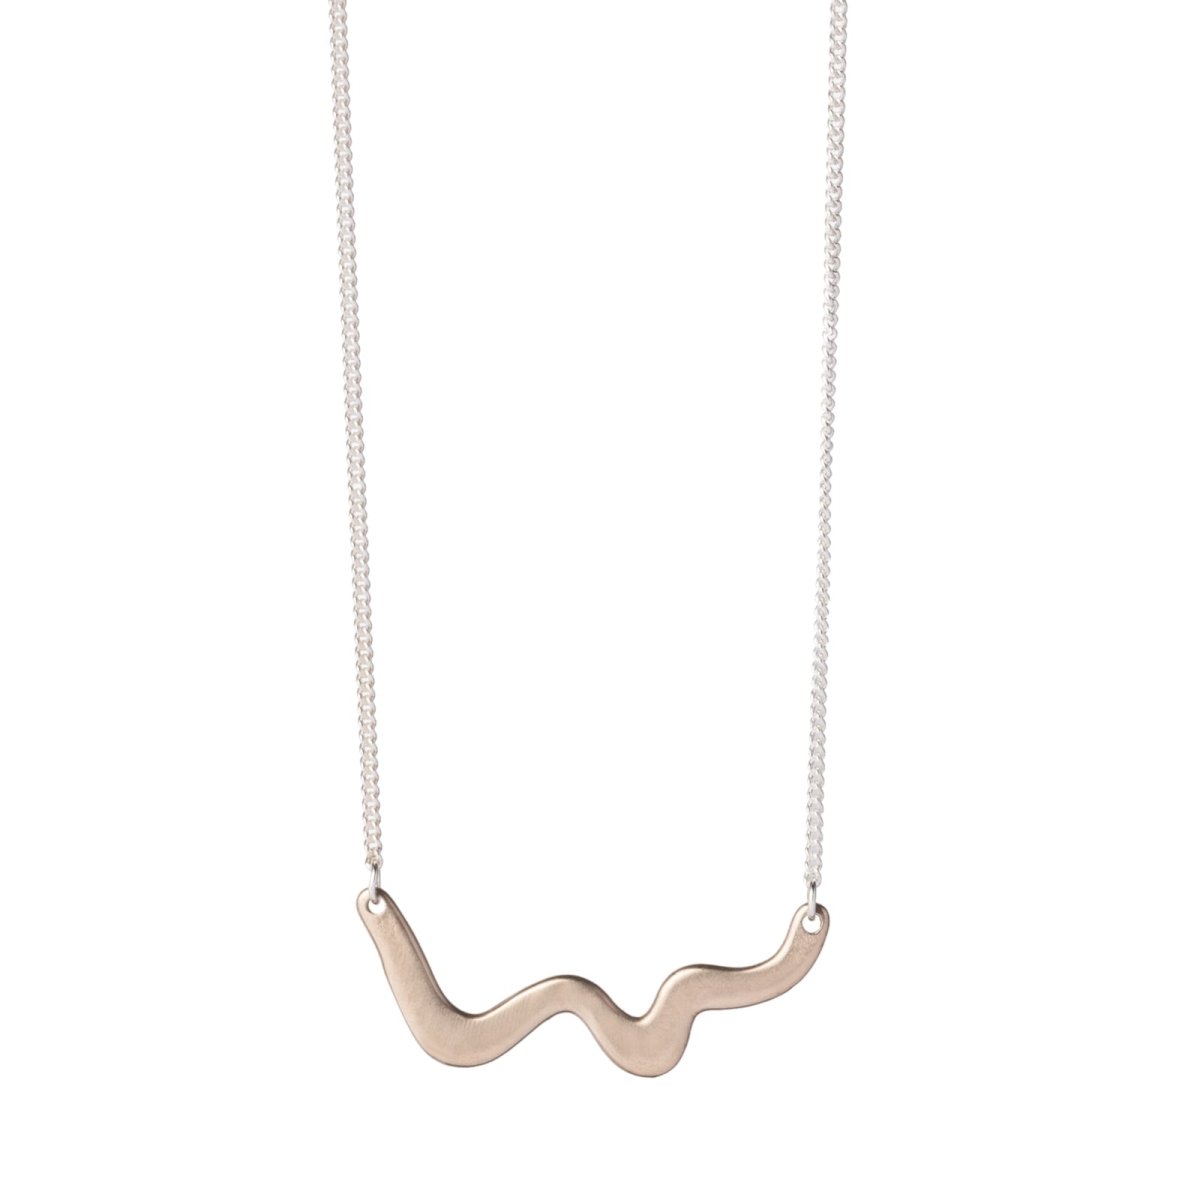 Small and delicate wave pendant of cast bronze, affixed on each end to a delicate, sterling silver chain. Hand-crafted in Portland, Oregon. 